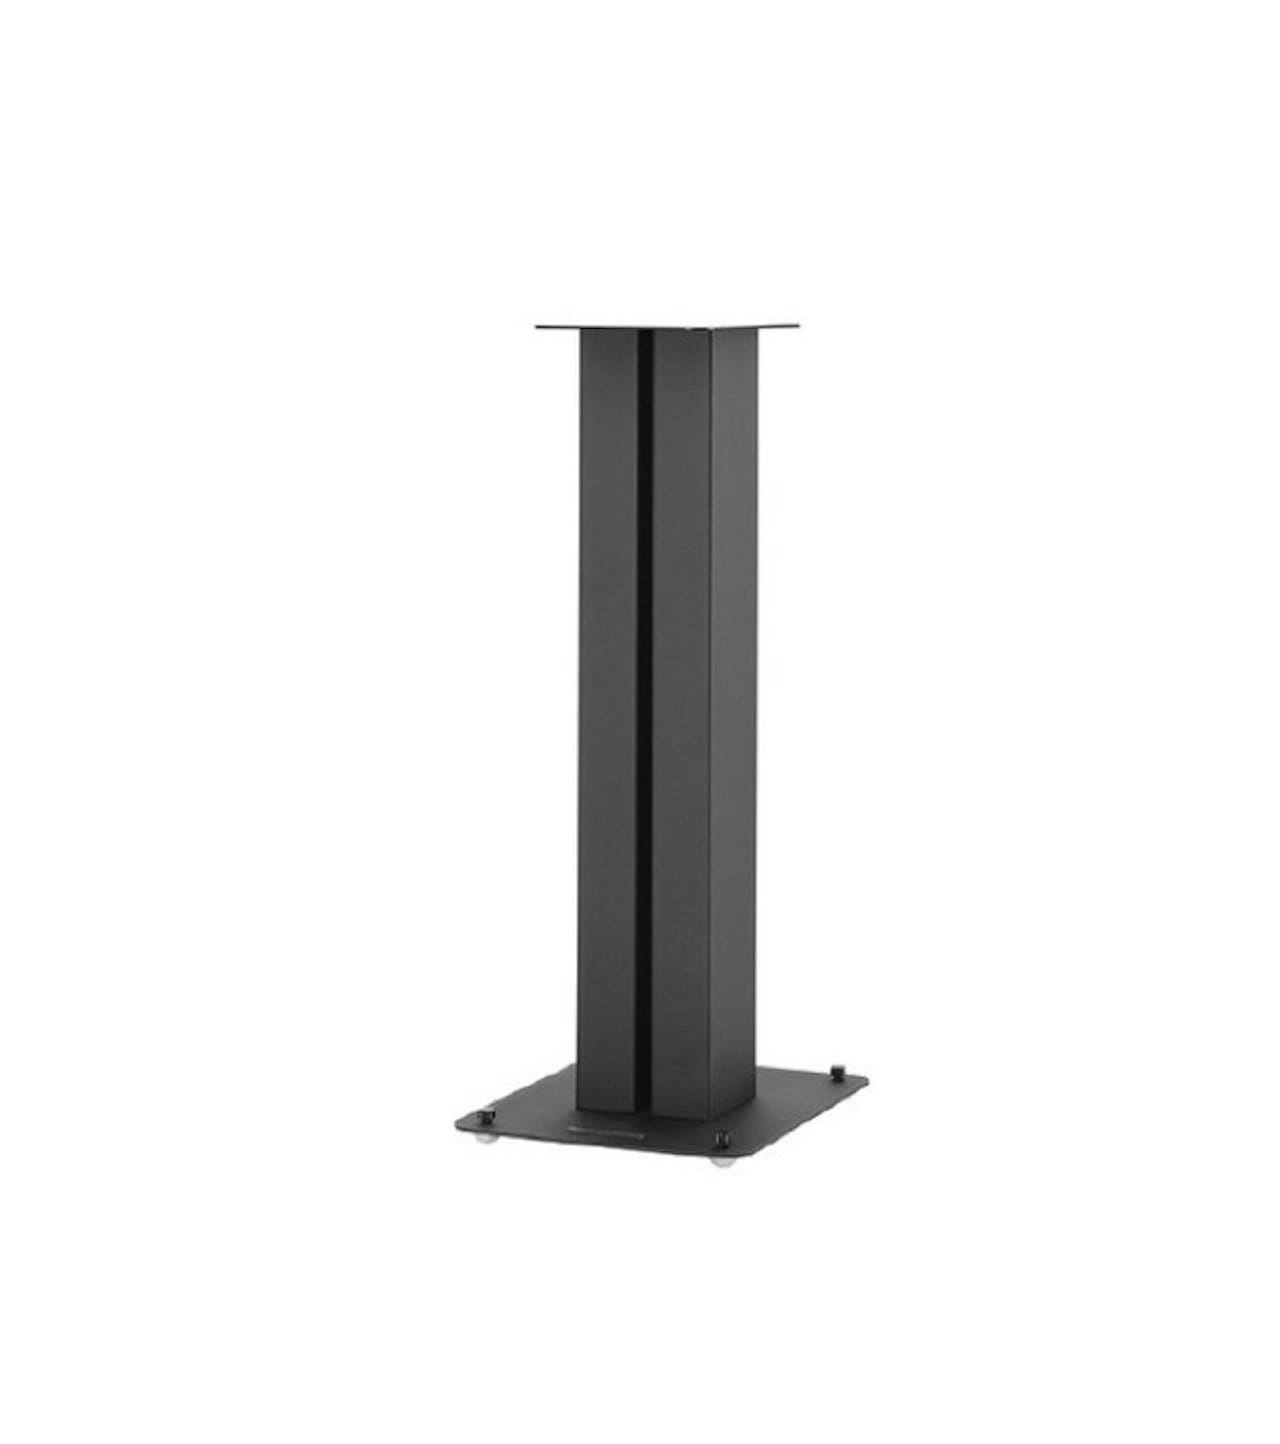 Bowers and Wilkins STAV24 S2 Speaker Stands